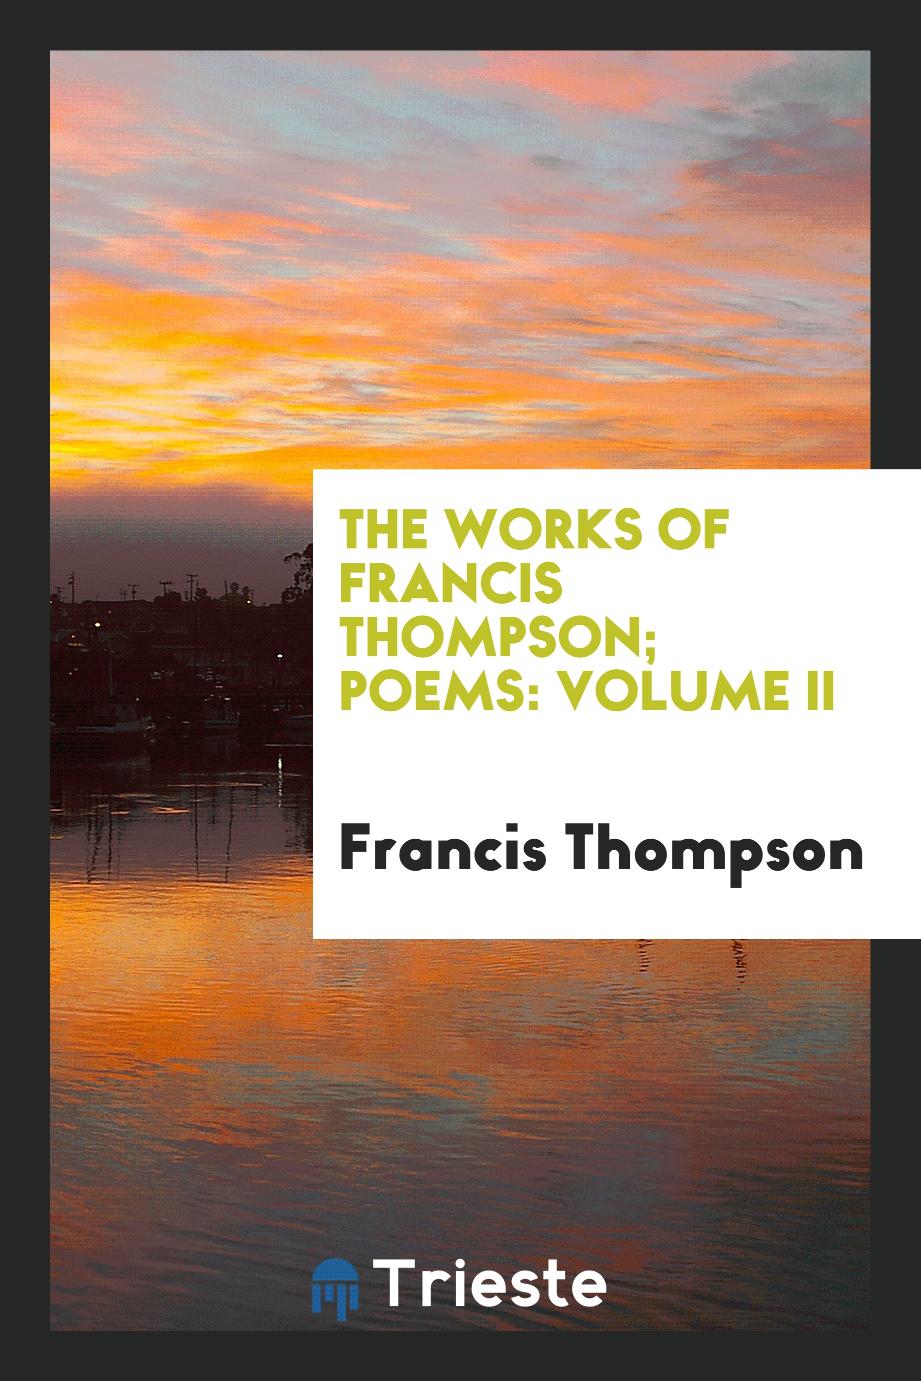 The works of Francis Thompson; Poems: Volume II